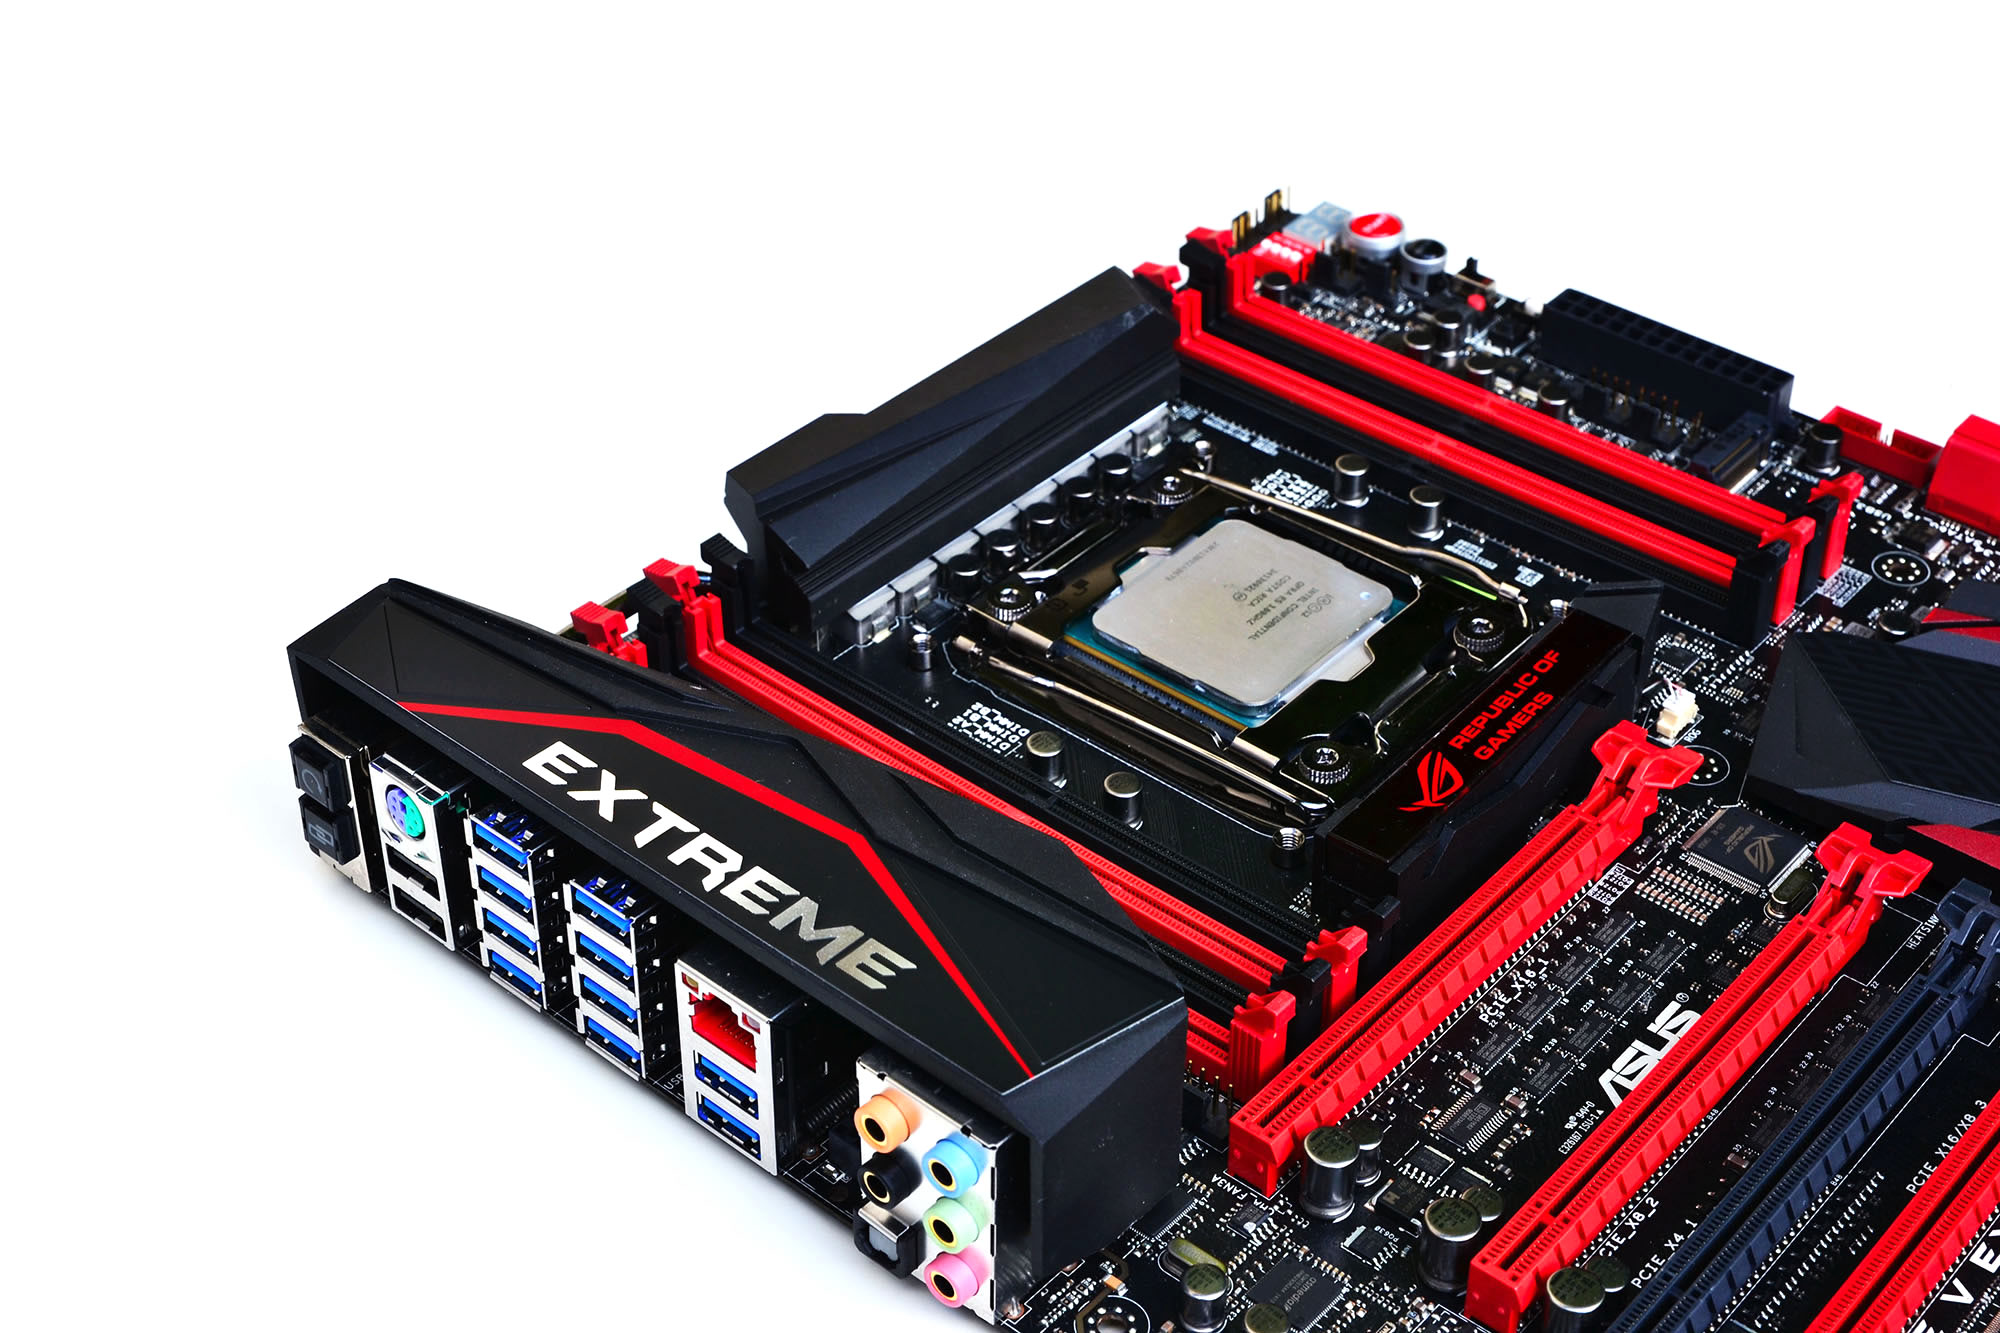 Image 24574, galerie Wizerty OC : World Record X99 & ASUS Rampage V Extreme